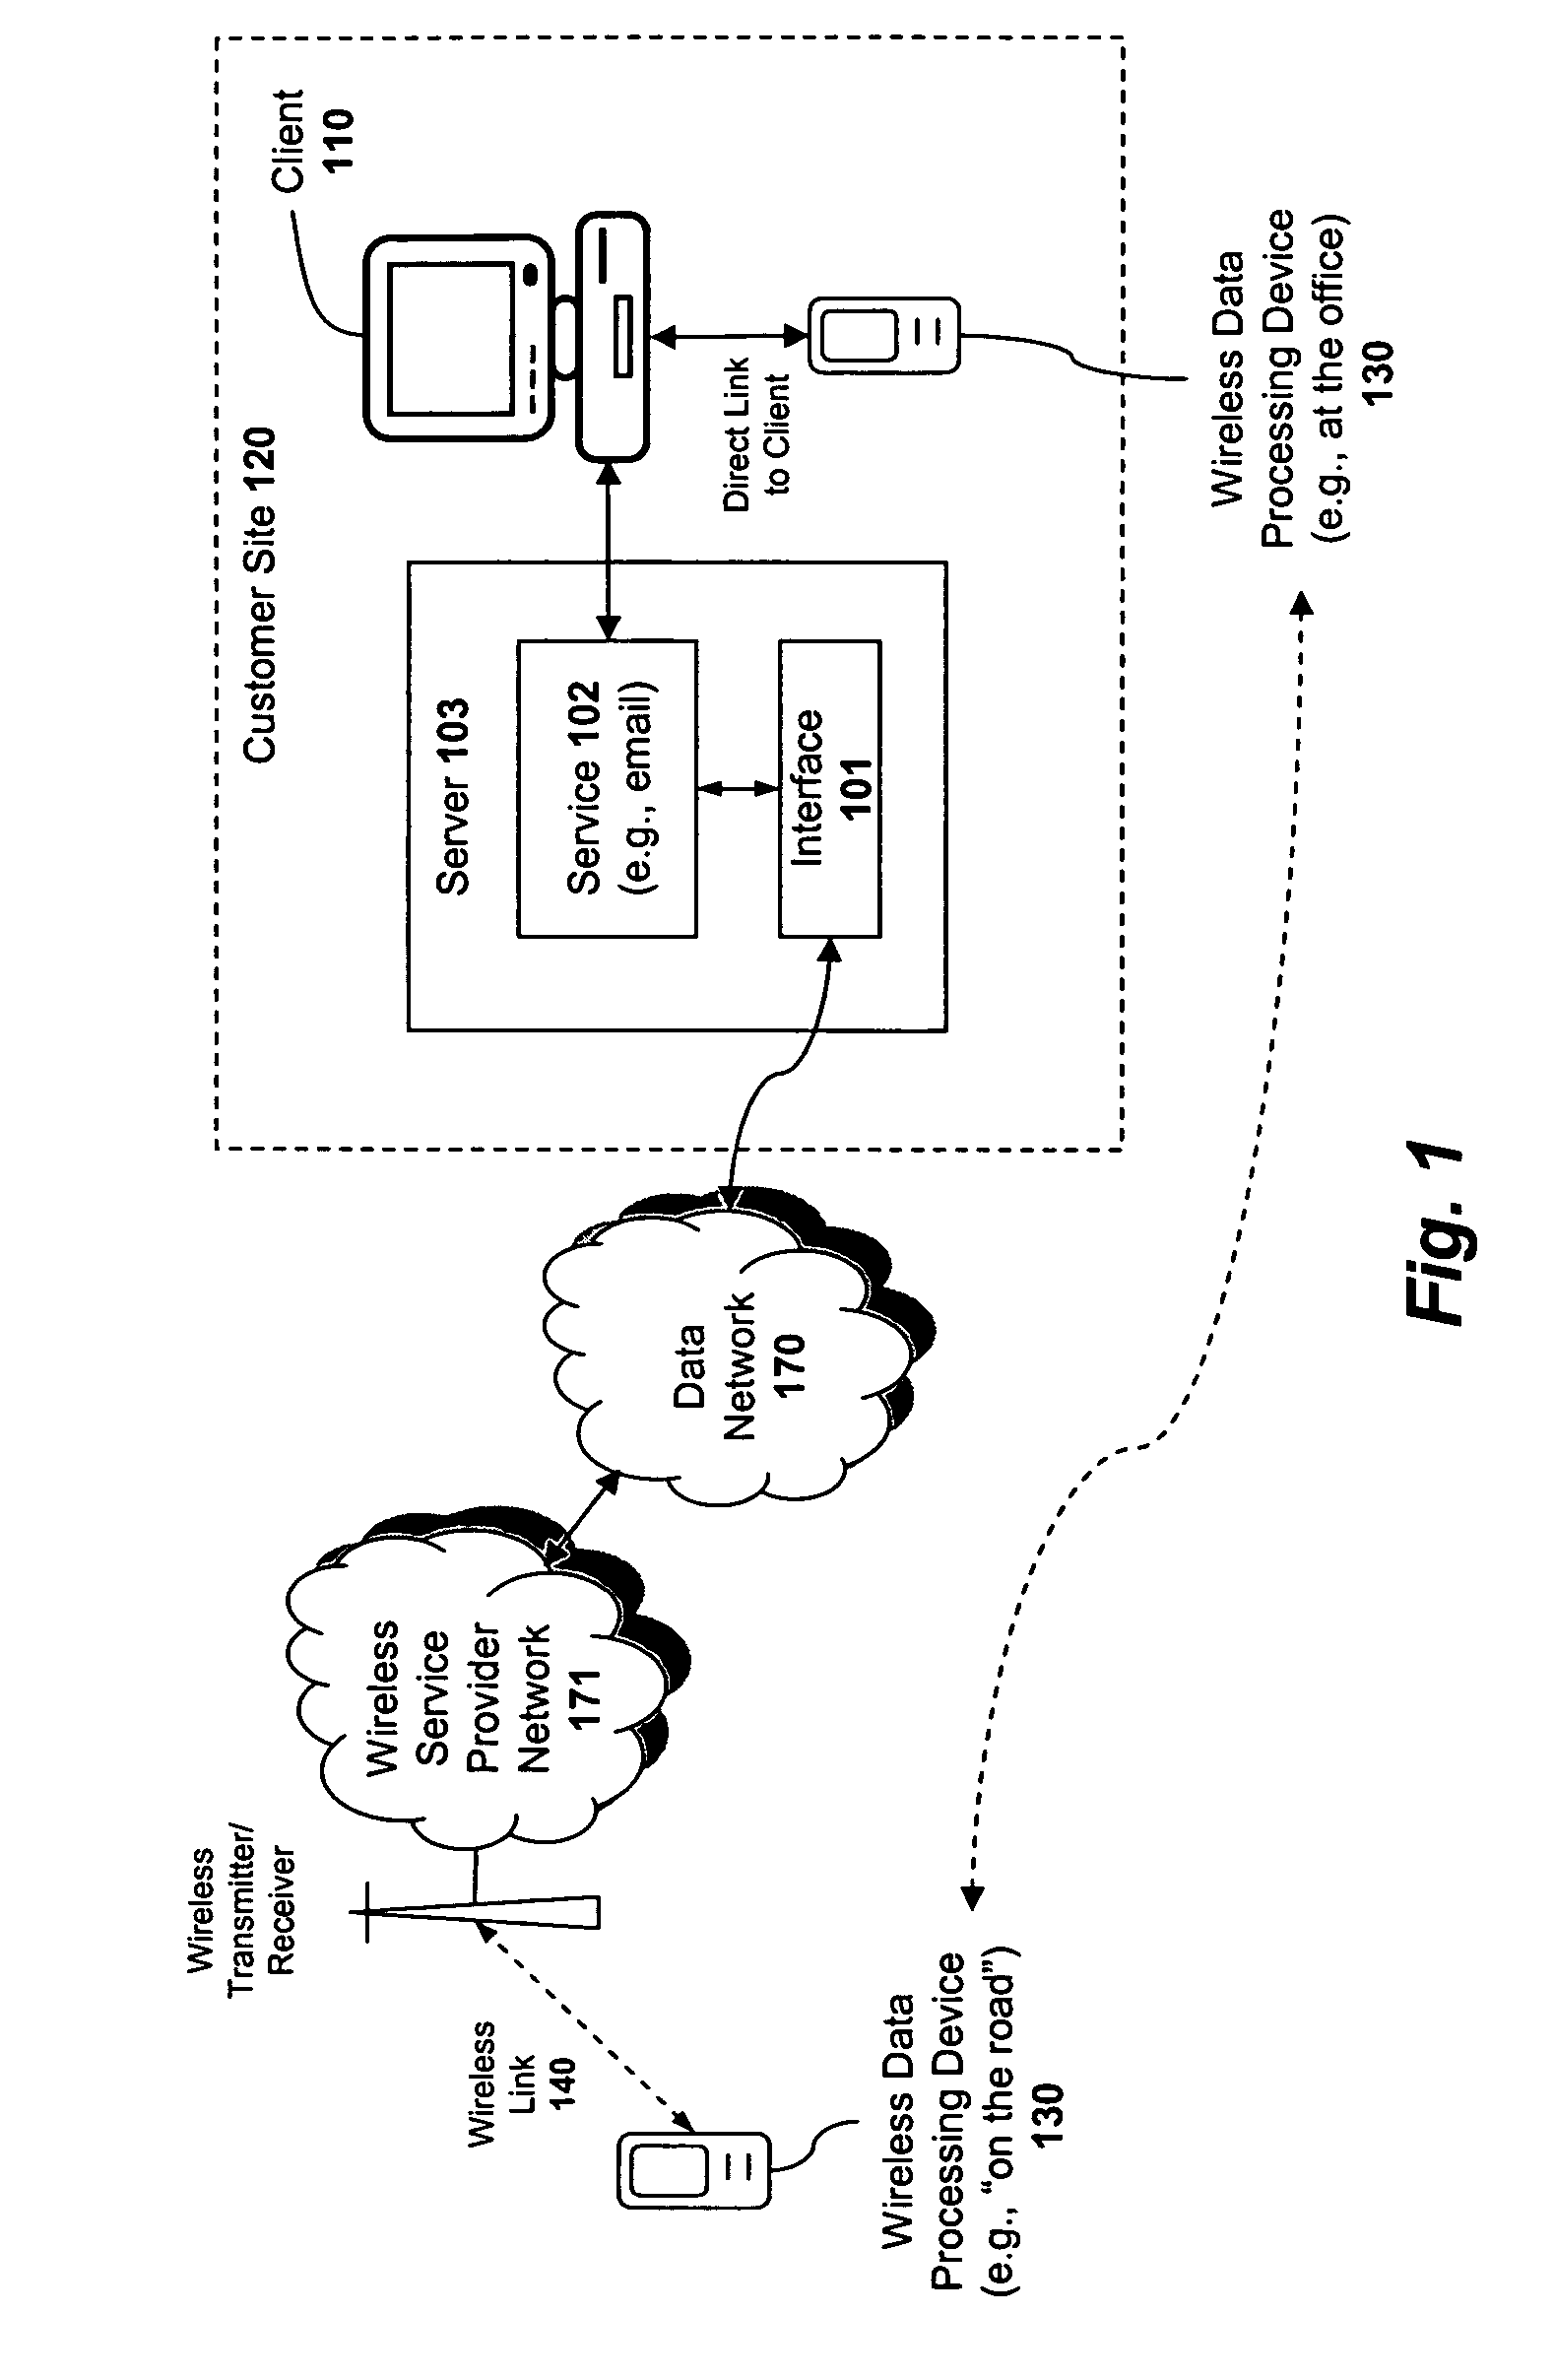 System and method for monitoring and maintaining a wireless device